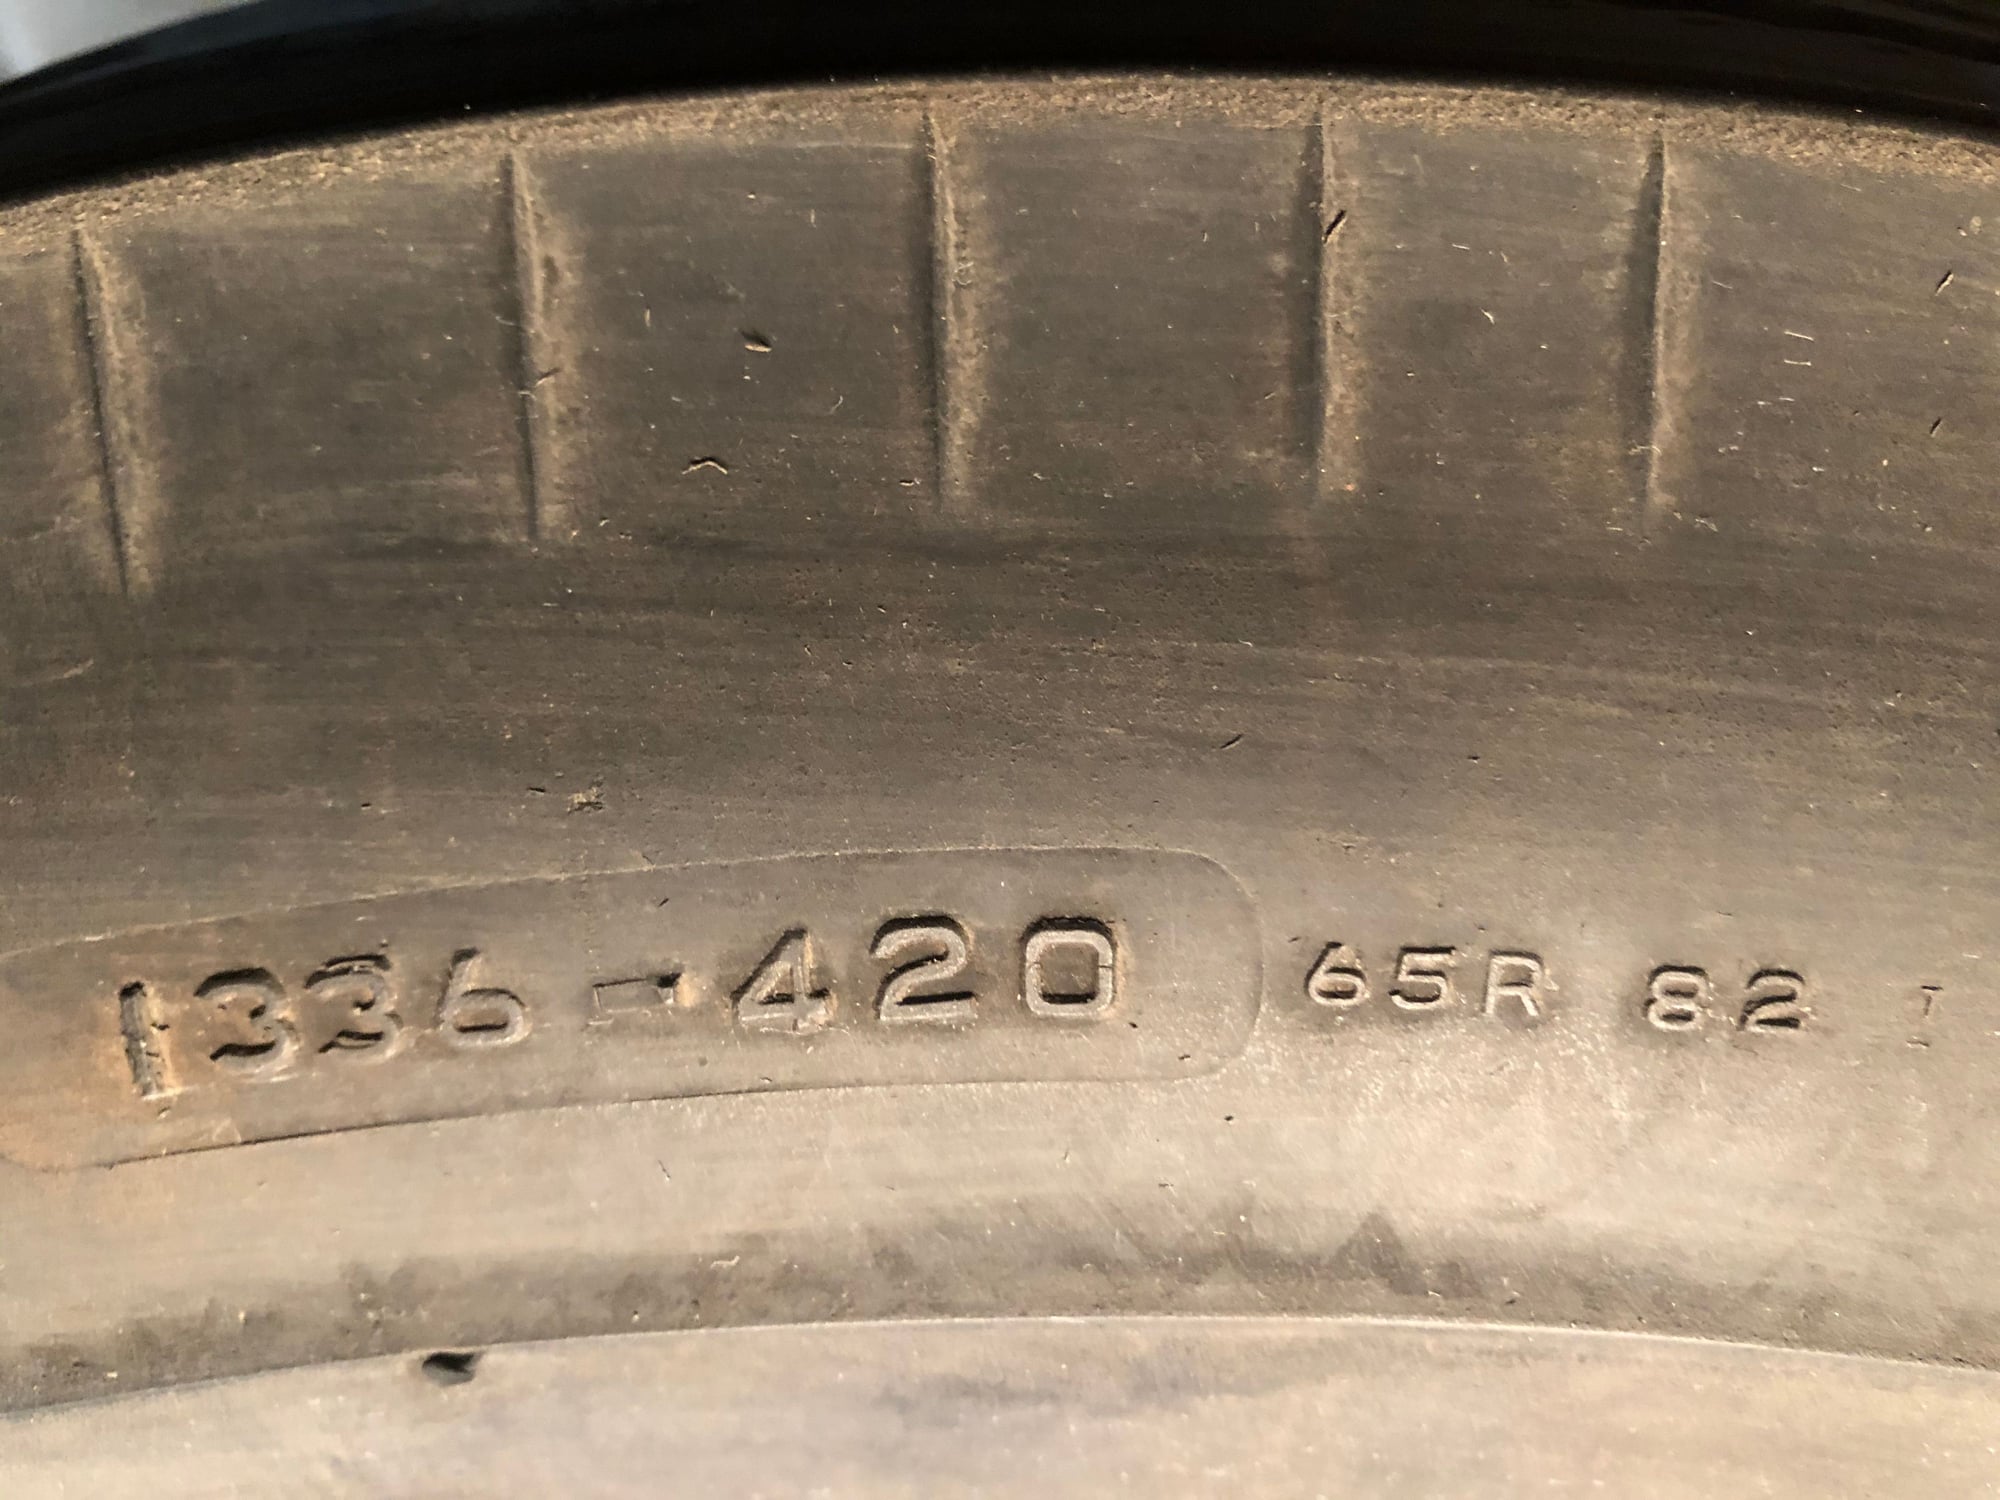 FS (For Sale) Original spare tire for sale C2 1965 - early 1967 ...